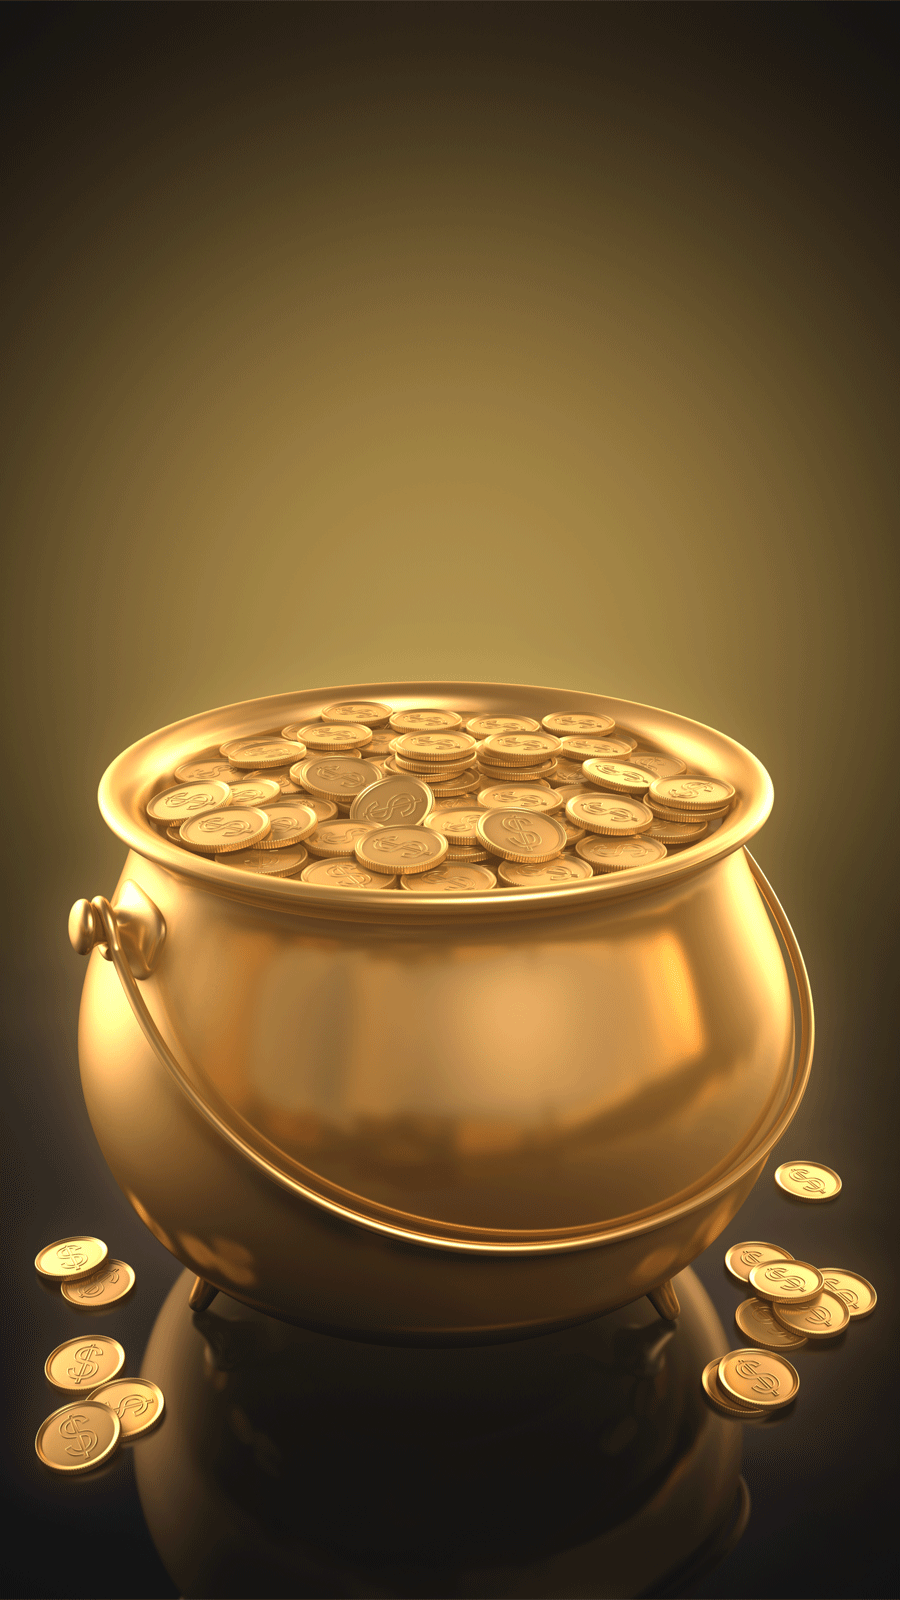 Gold coins HD wallpapers free download  Wallpaperbetter